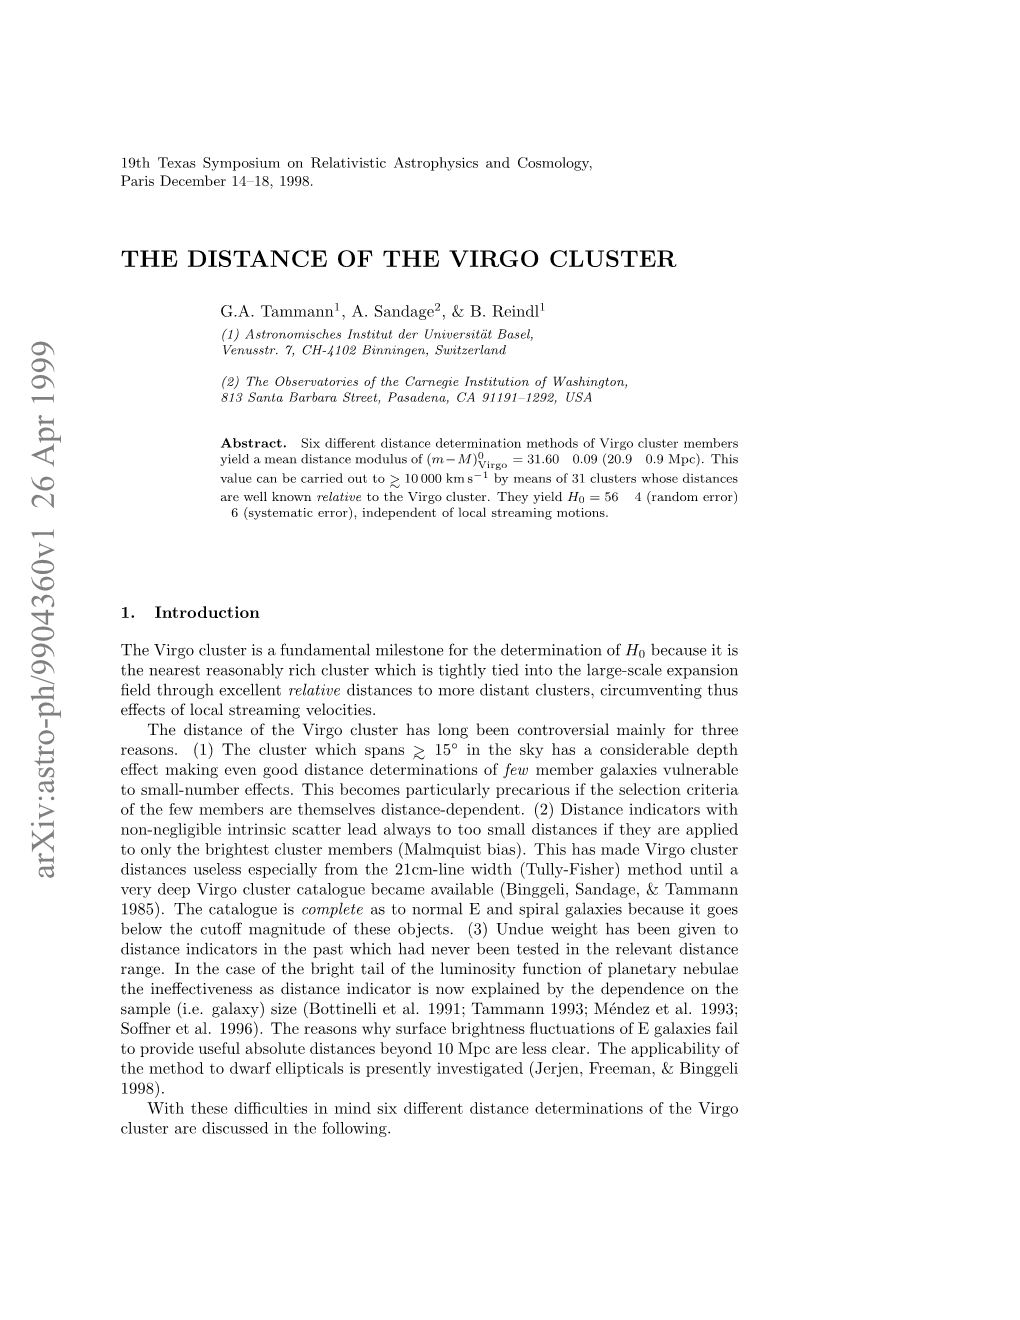 The Distance of the Virgo Cluster